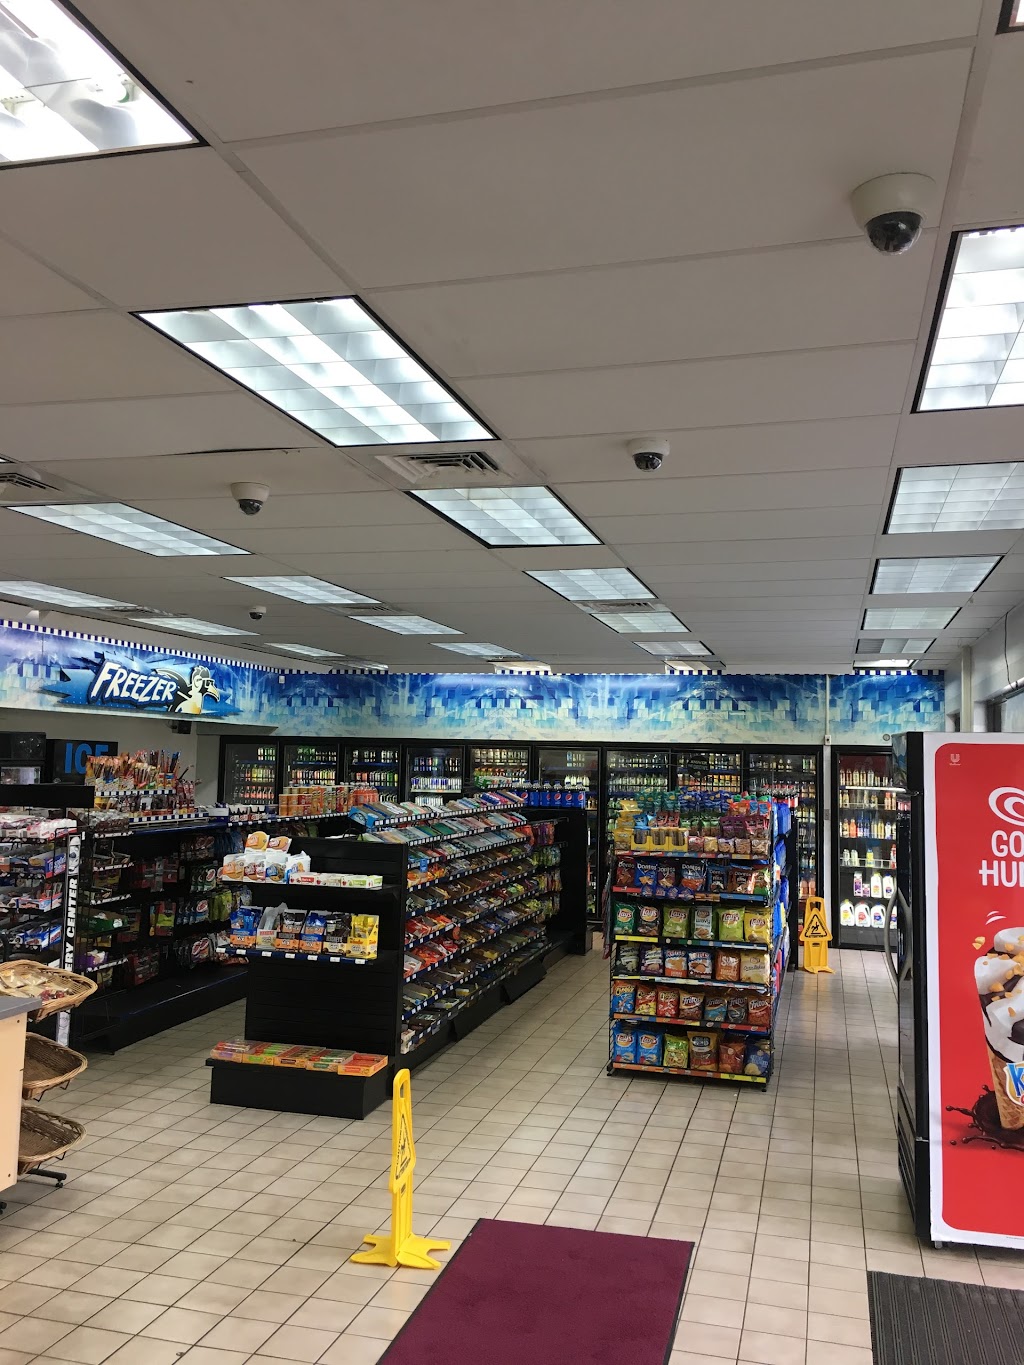 Sunoco Gas Station | 80 Frontage Rd, East Haven, CT 06512 | Phone: (203) 467-1675